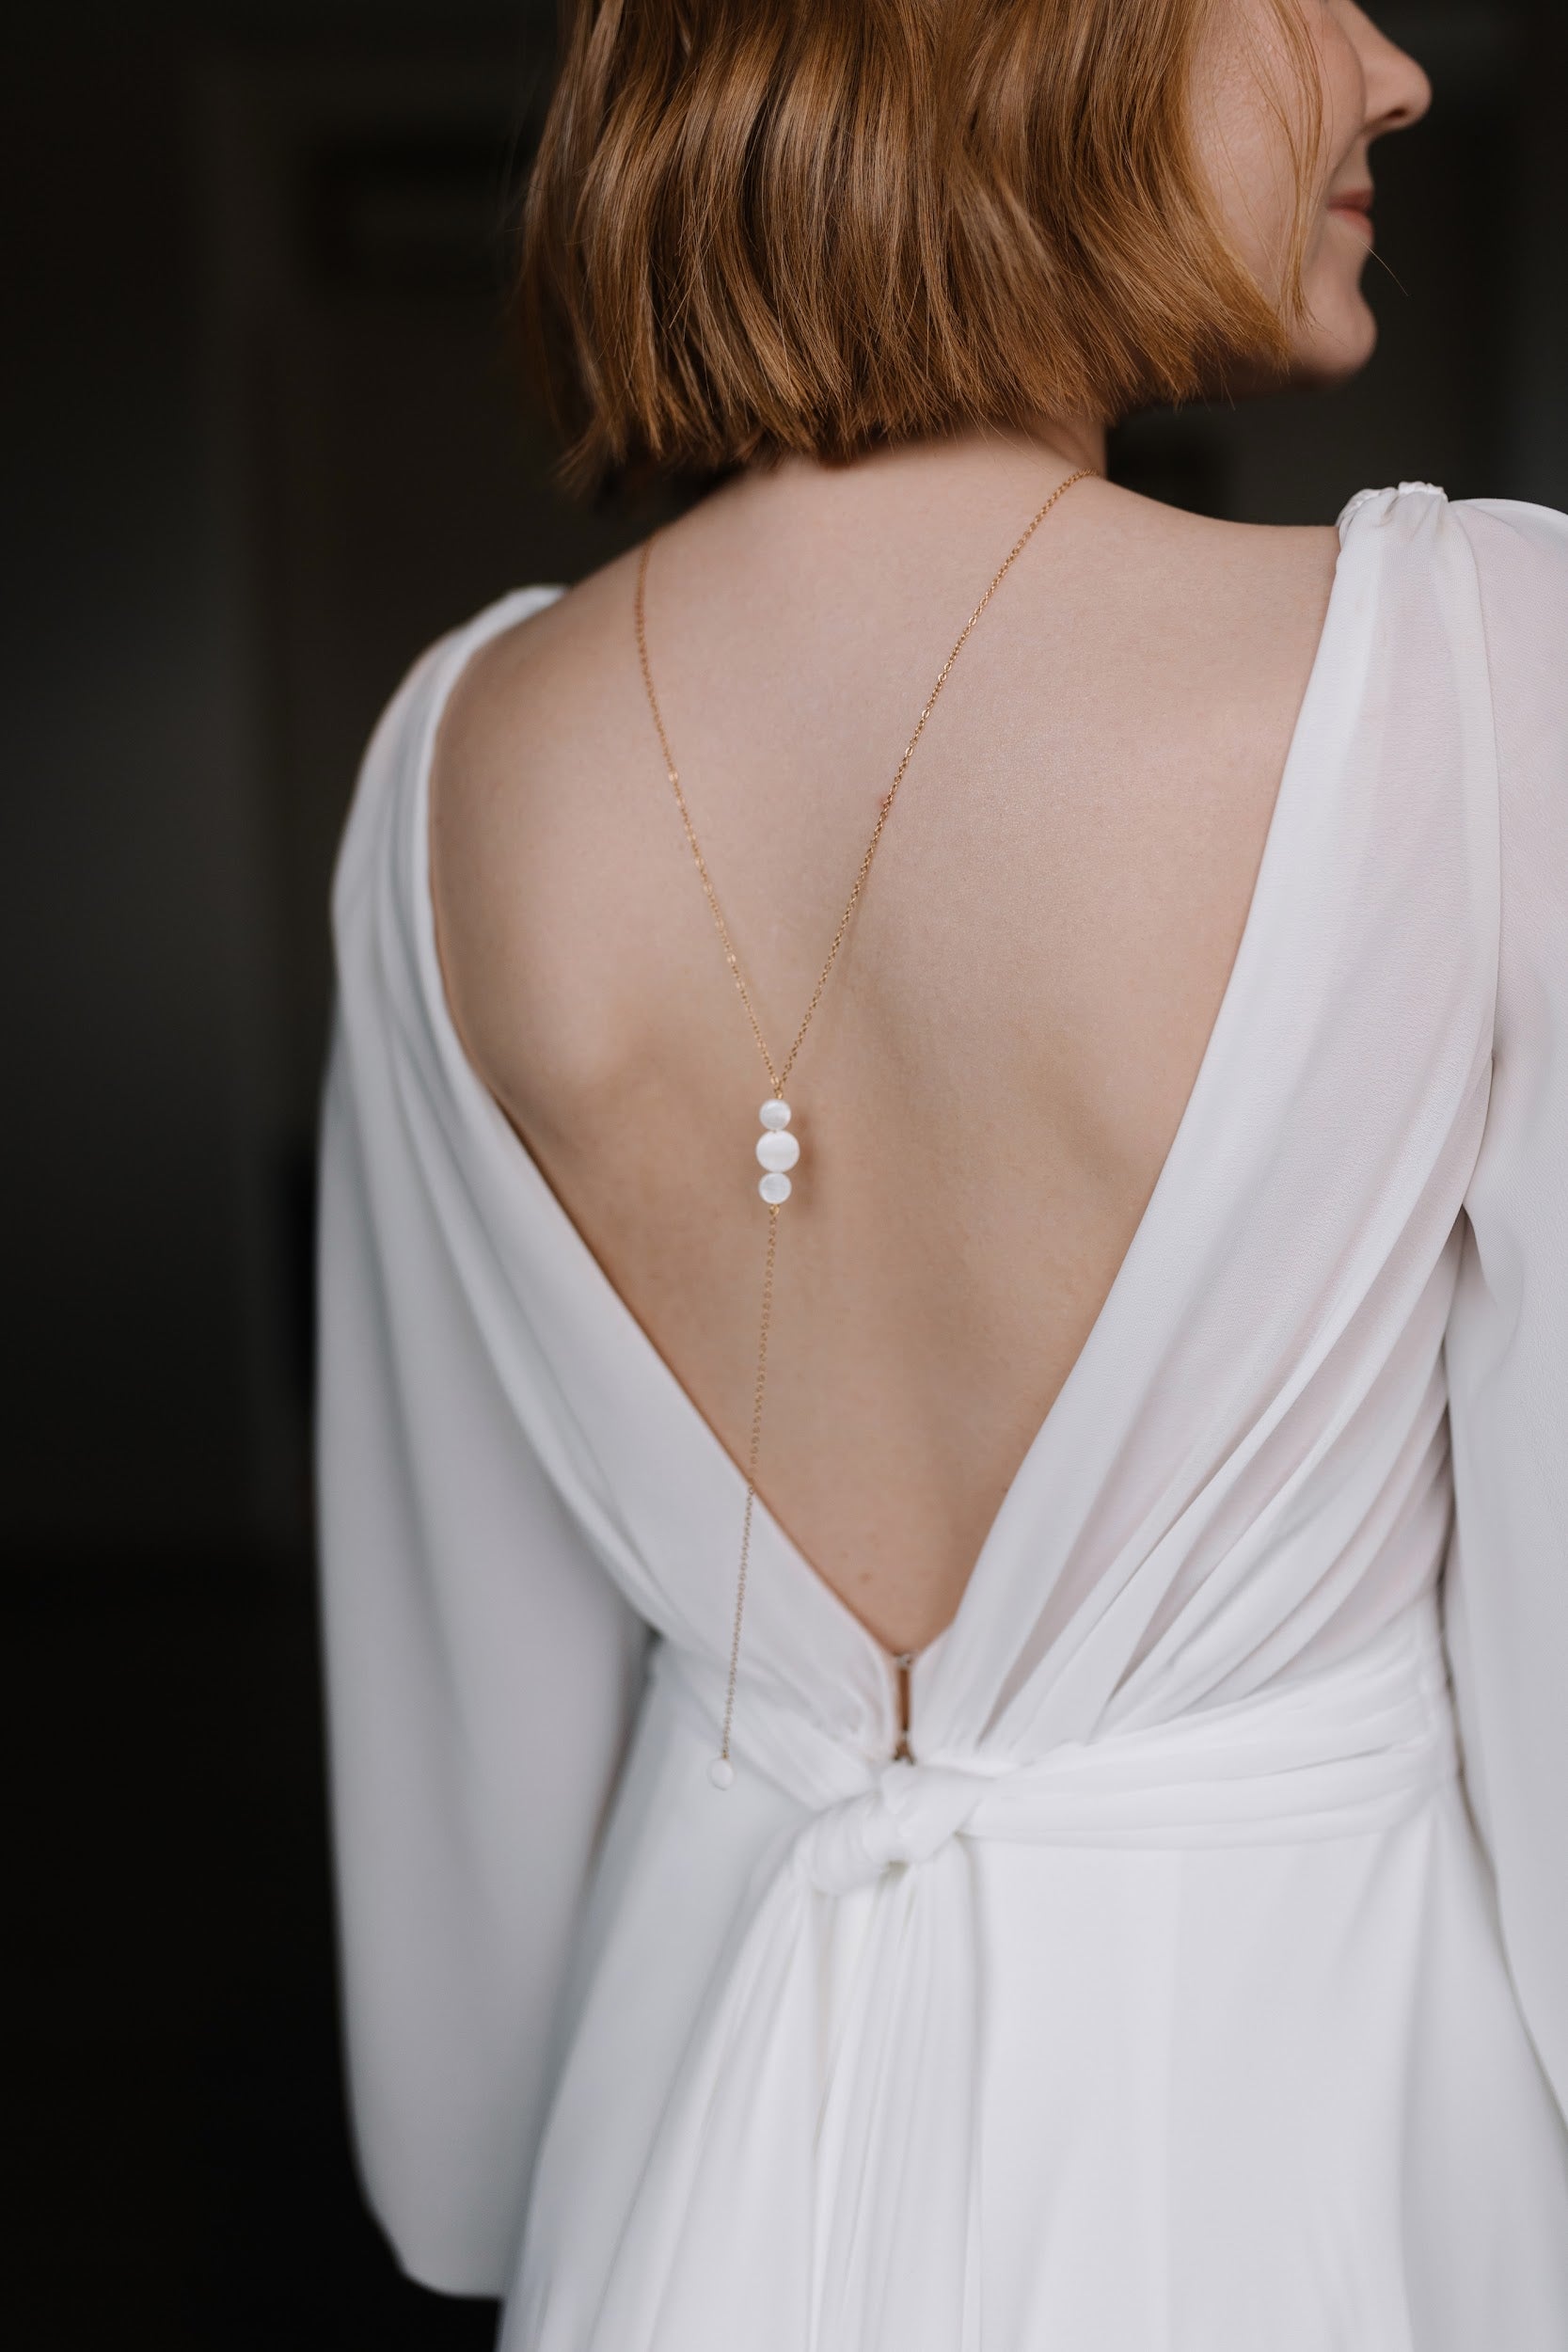 Luana - Mother of pearl back necklace